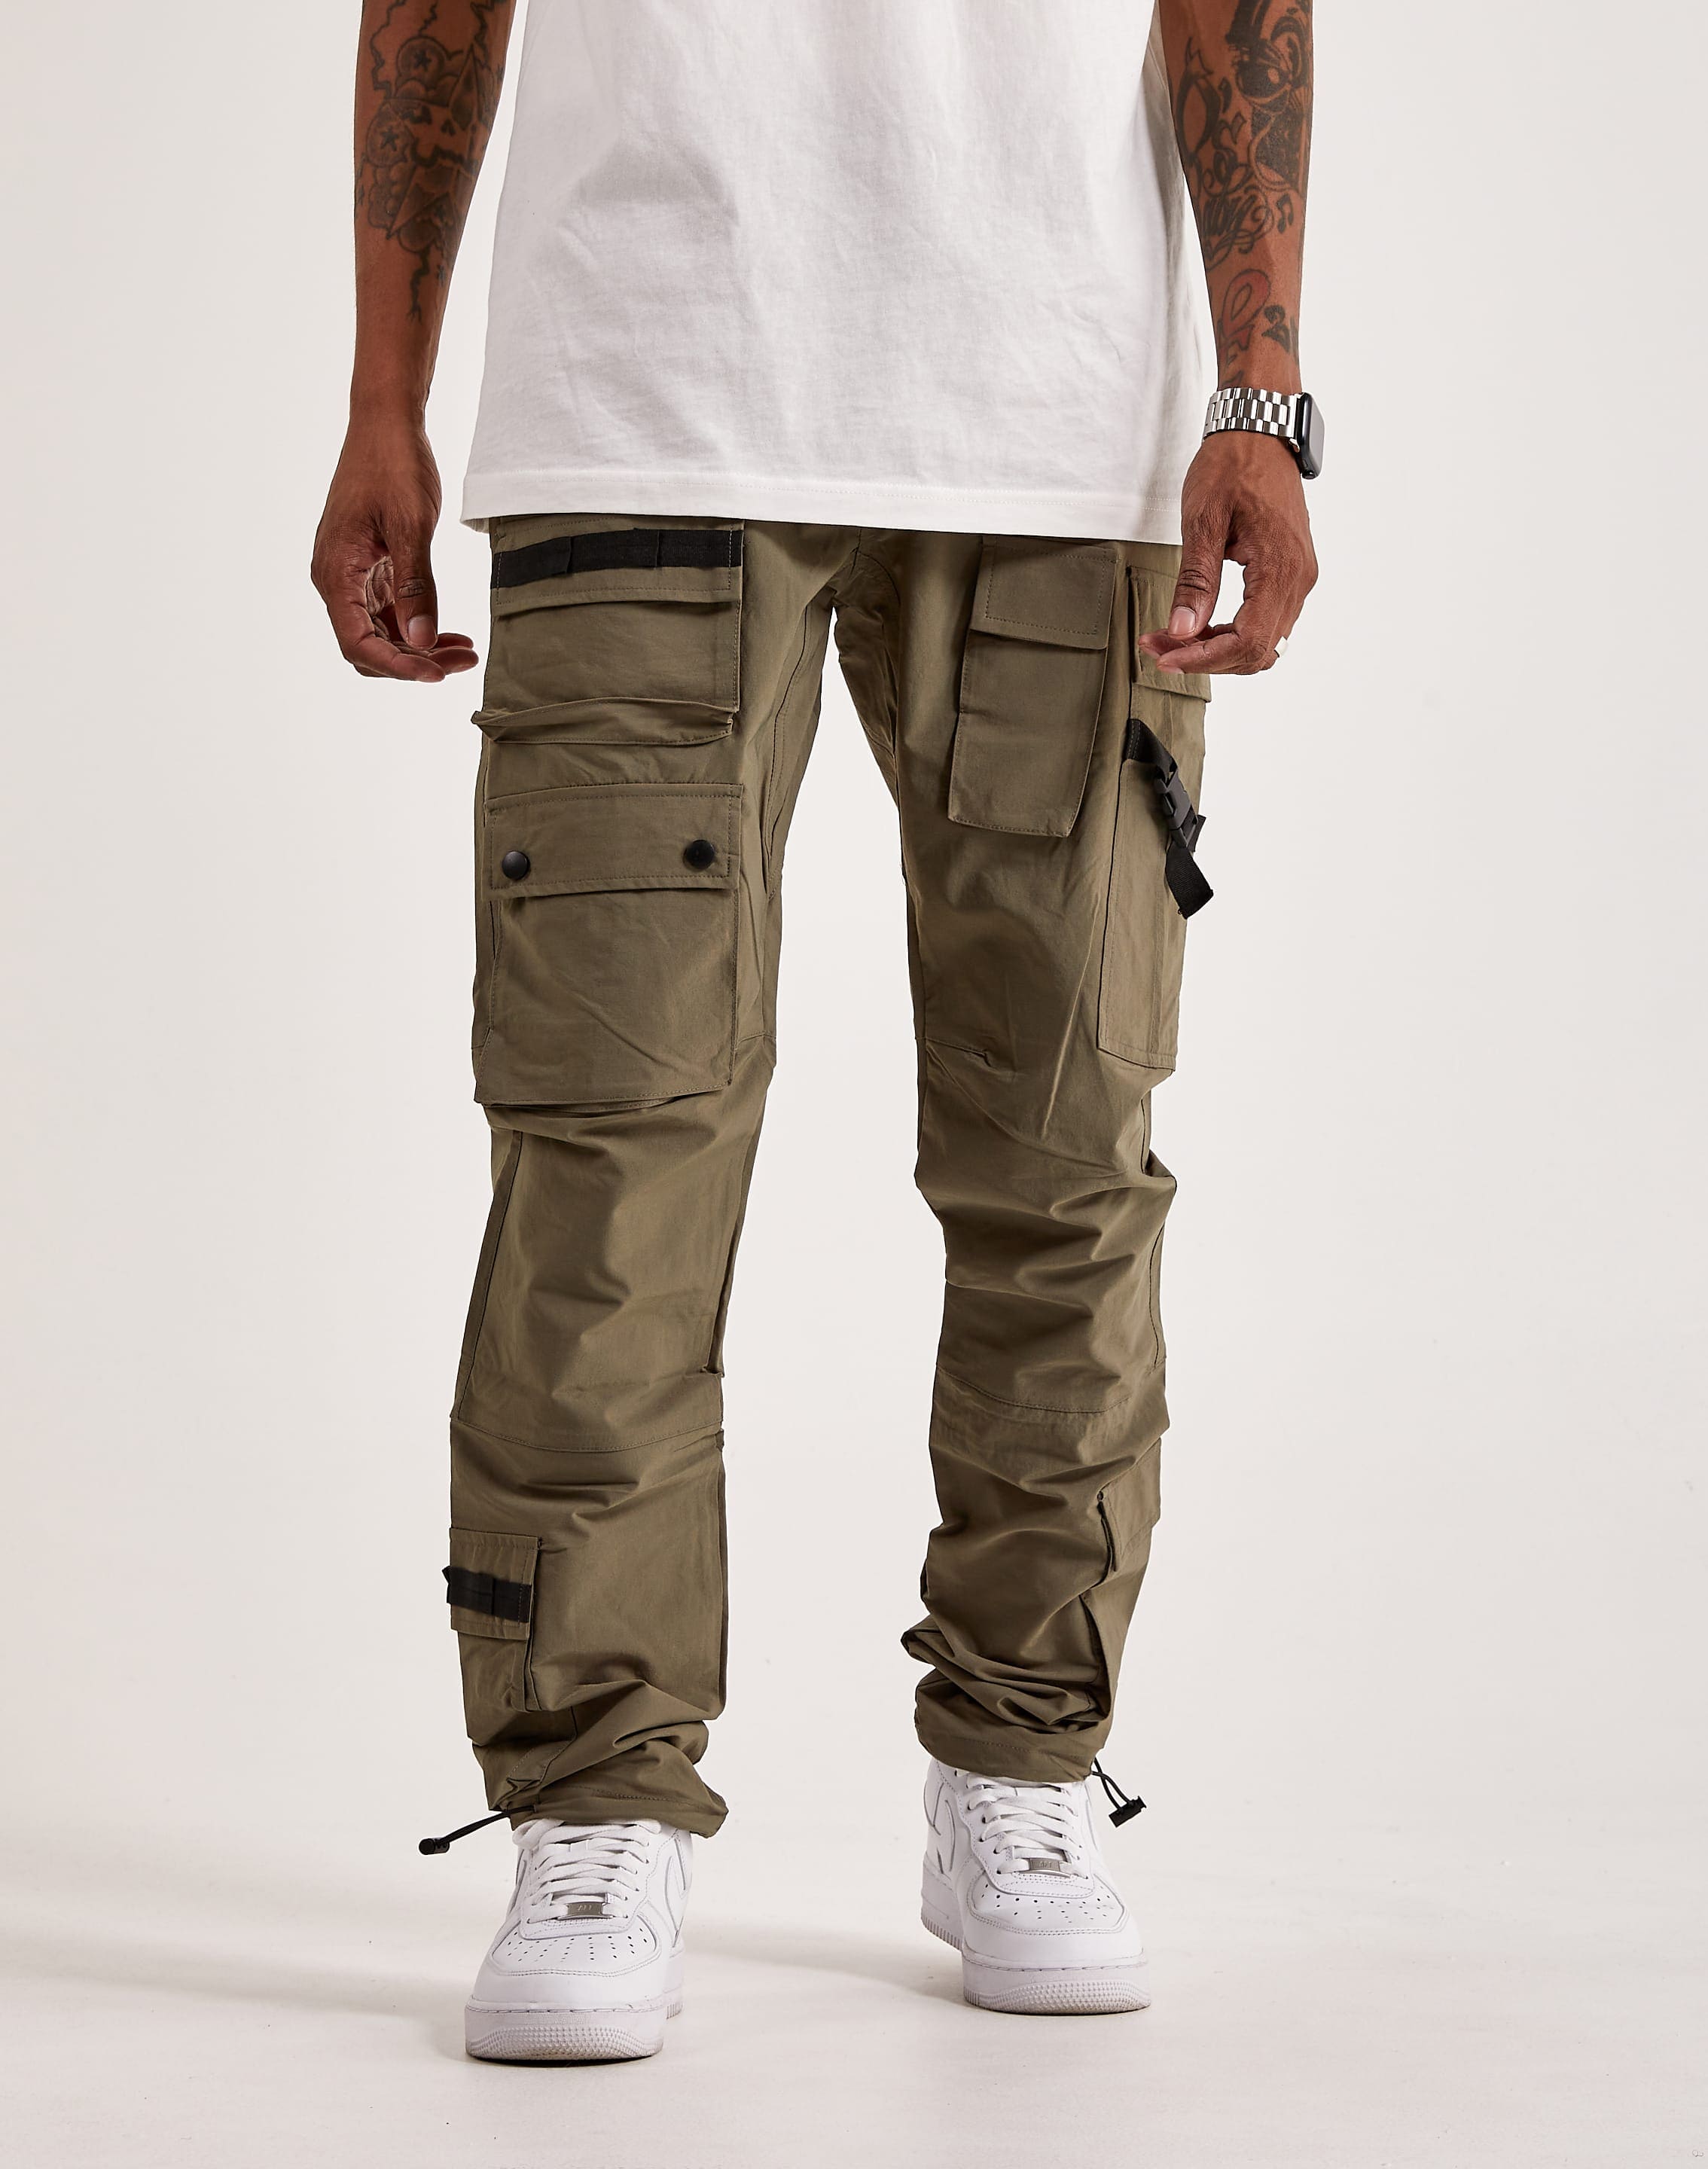 American Stitch Olive Nylon Cargo Pants | CoolSprings Galleria